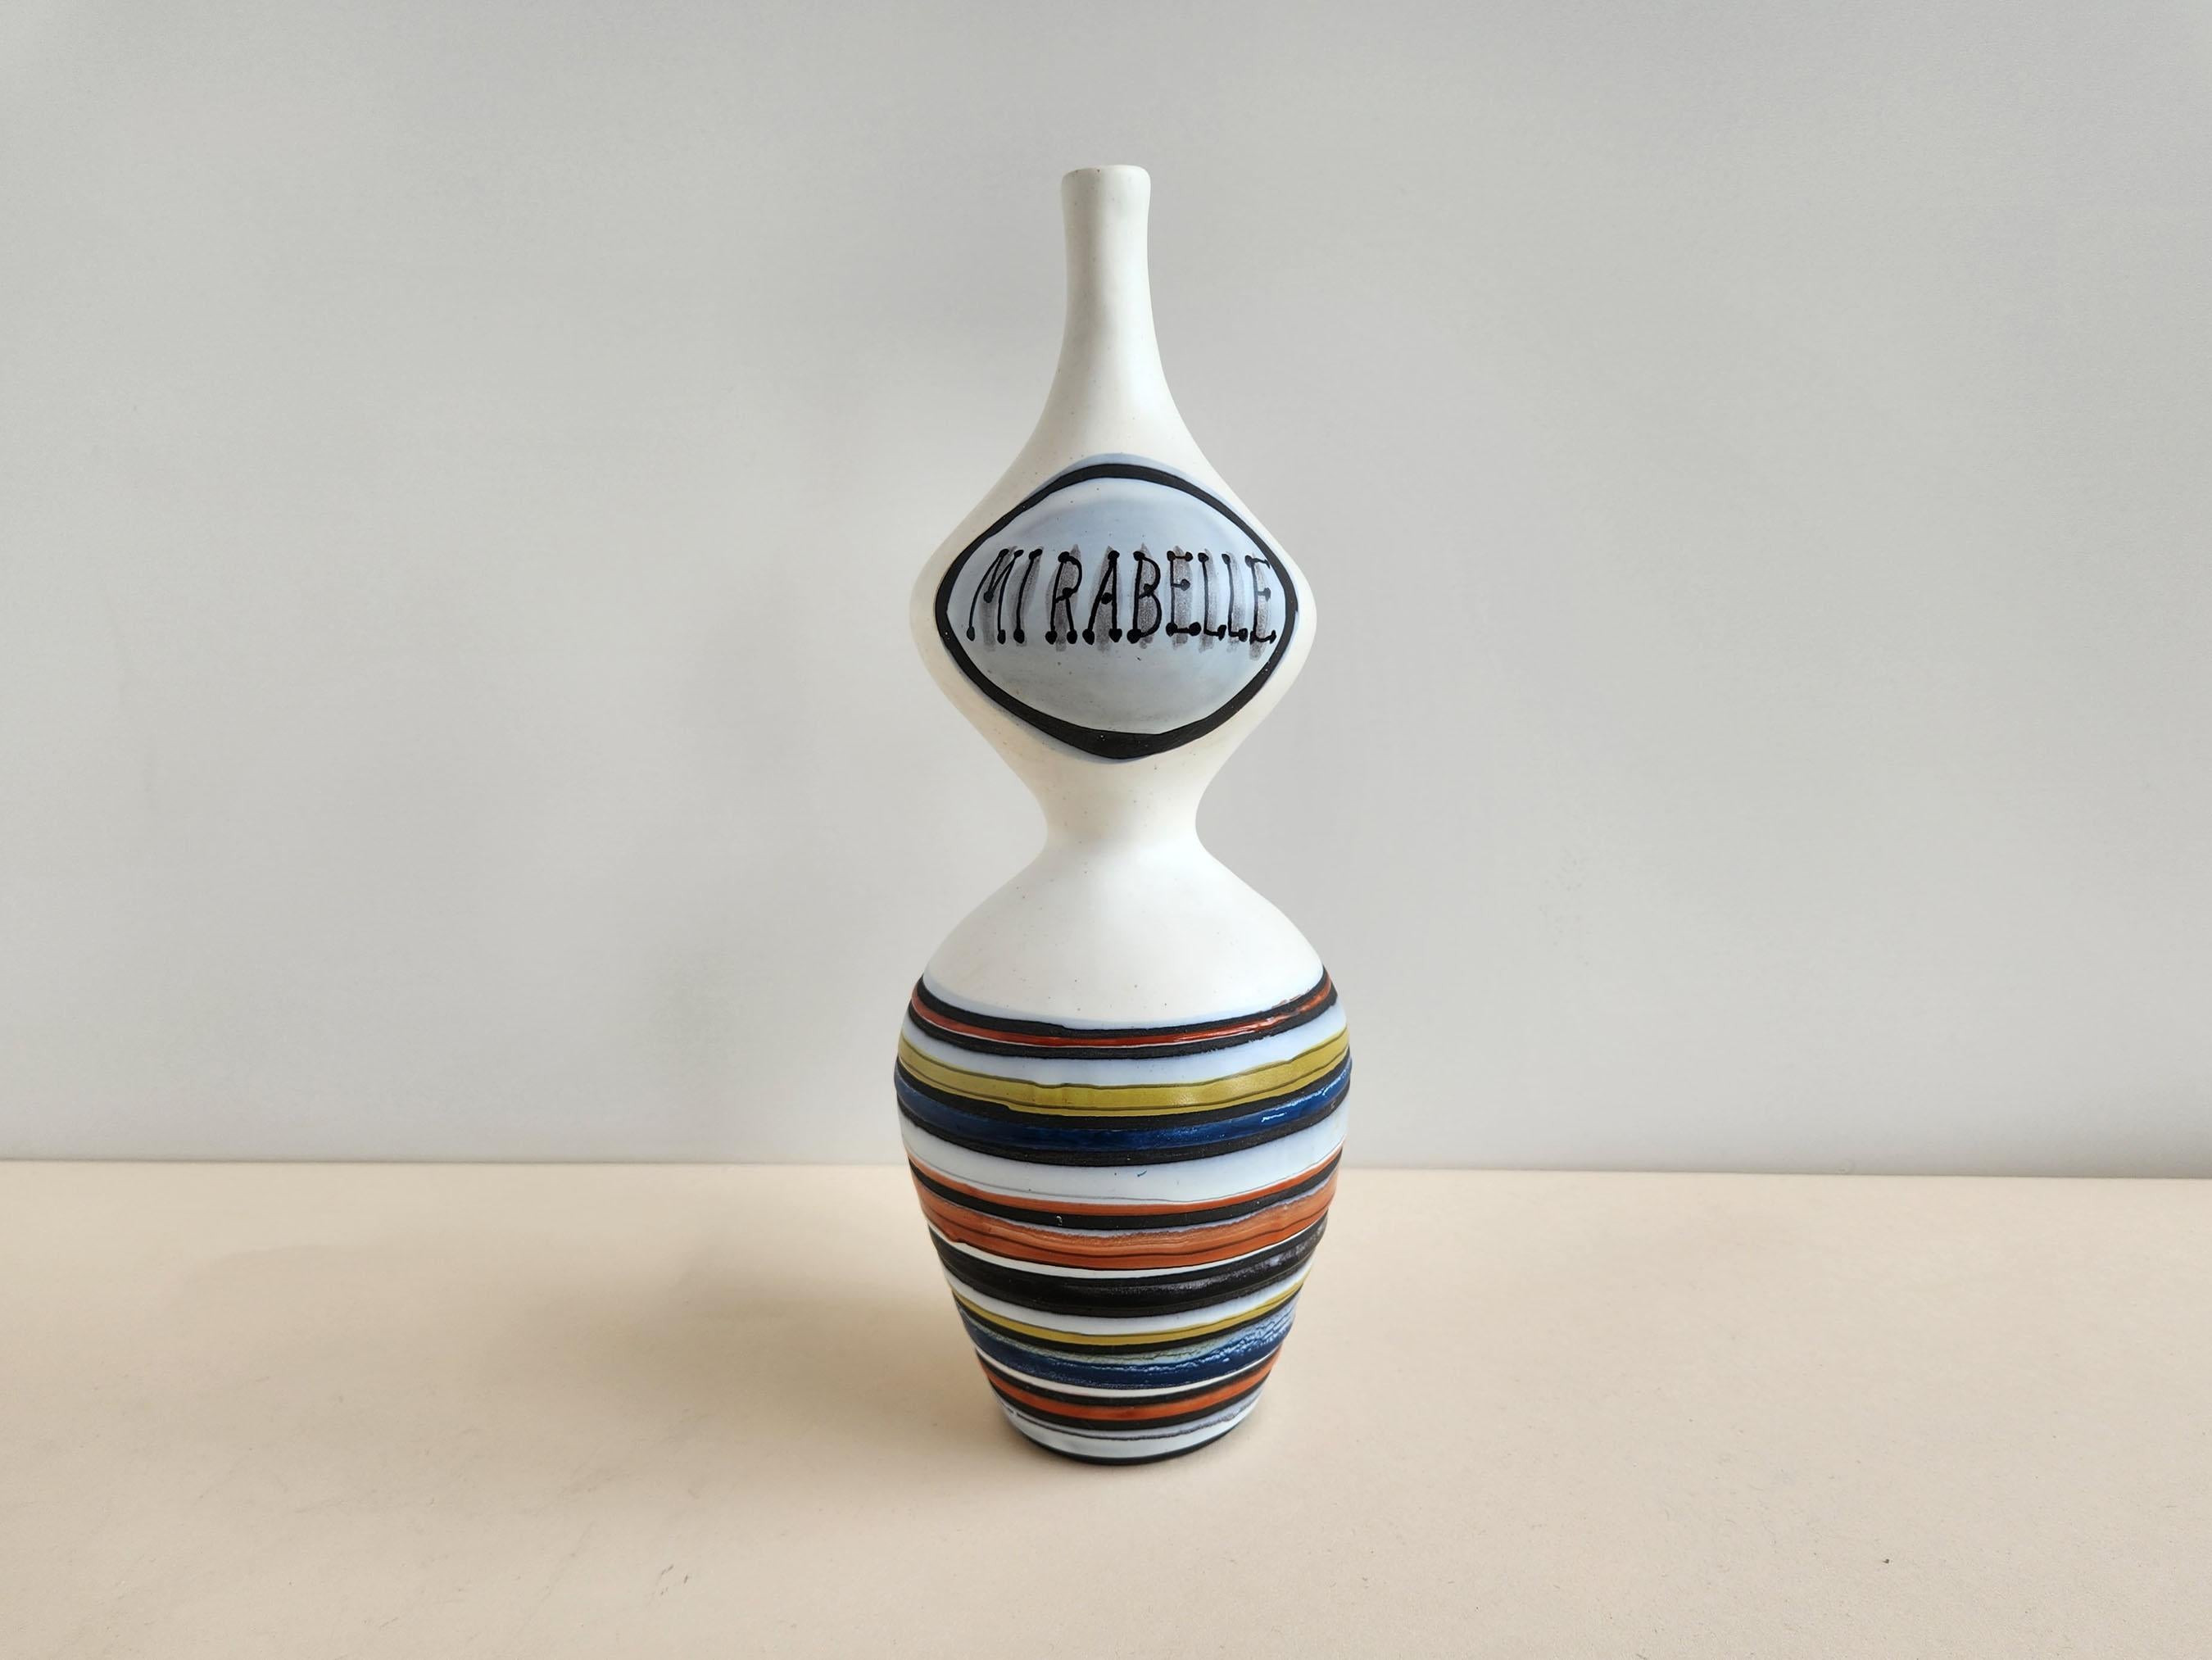 Vintage ceramic Mirabelle flask by Roger Capron - Vallauris, France

Roger Capron was in influential French ceramicist, known for his tiled tables and his use of recurring motifs such as stylized branches and geometrical suns.   He was born in